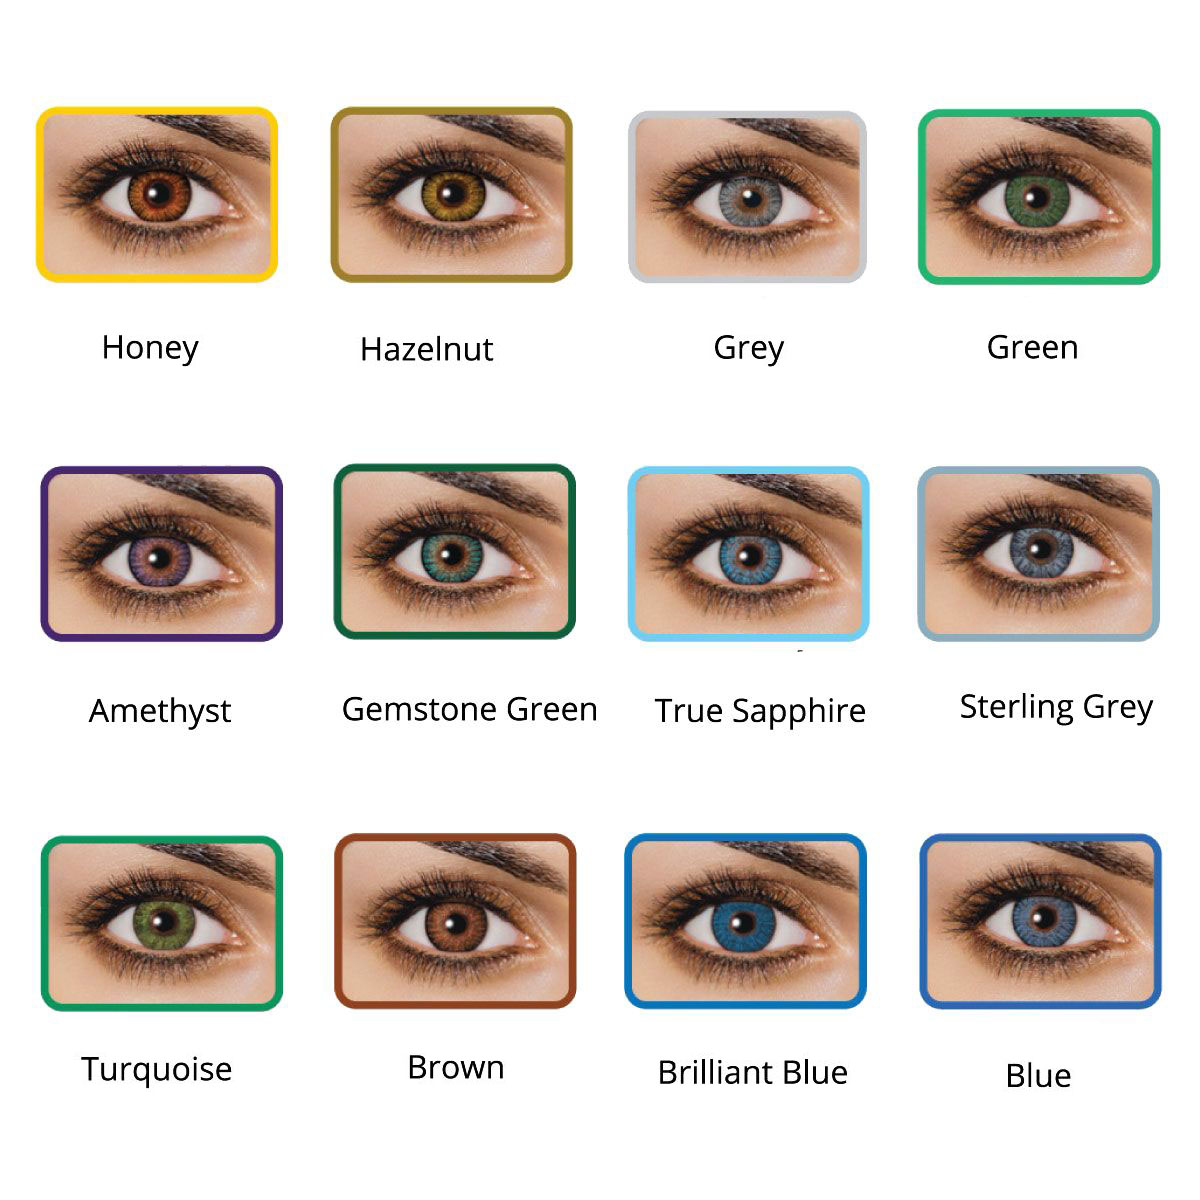 alcon-freshlook-colorblends-perfect-vision